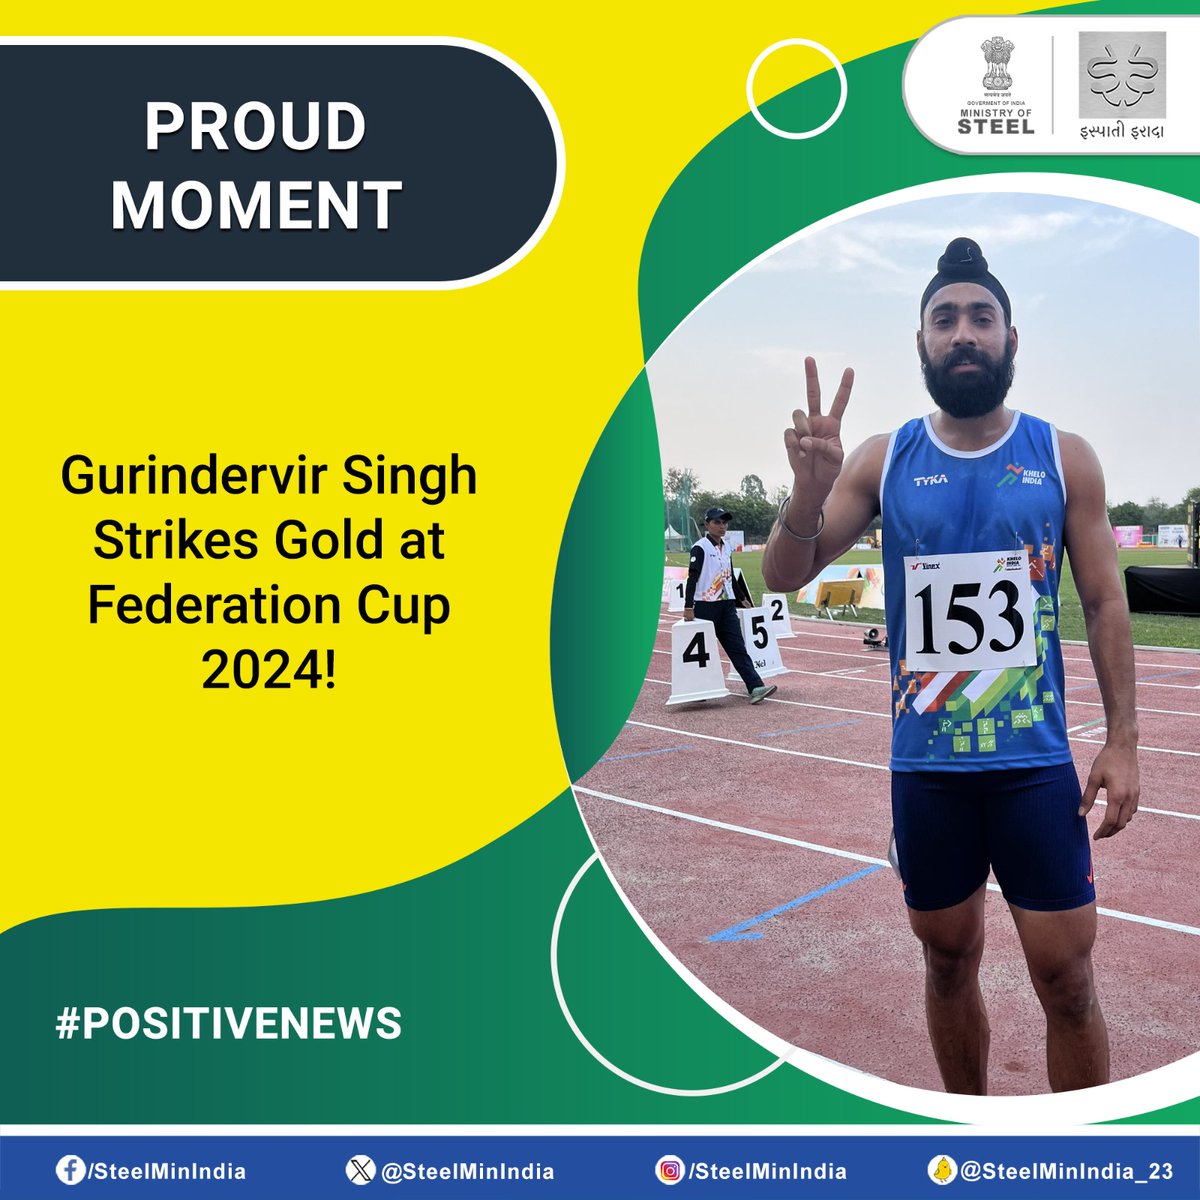 #GurindervirSingh sprints his way to victory at the #FederationCup2024, clinching the coveted #gold🥇in the men's 100m event with a lightning-fast time of 10.35 seconds.🇮🇳 #PositiveNews